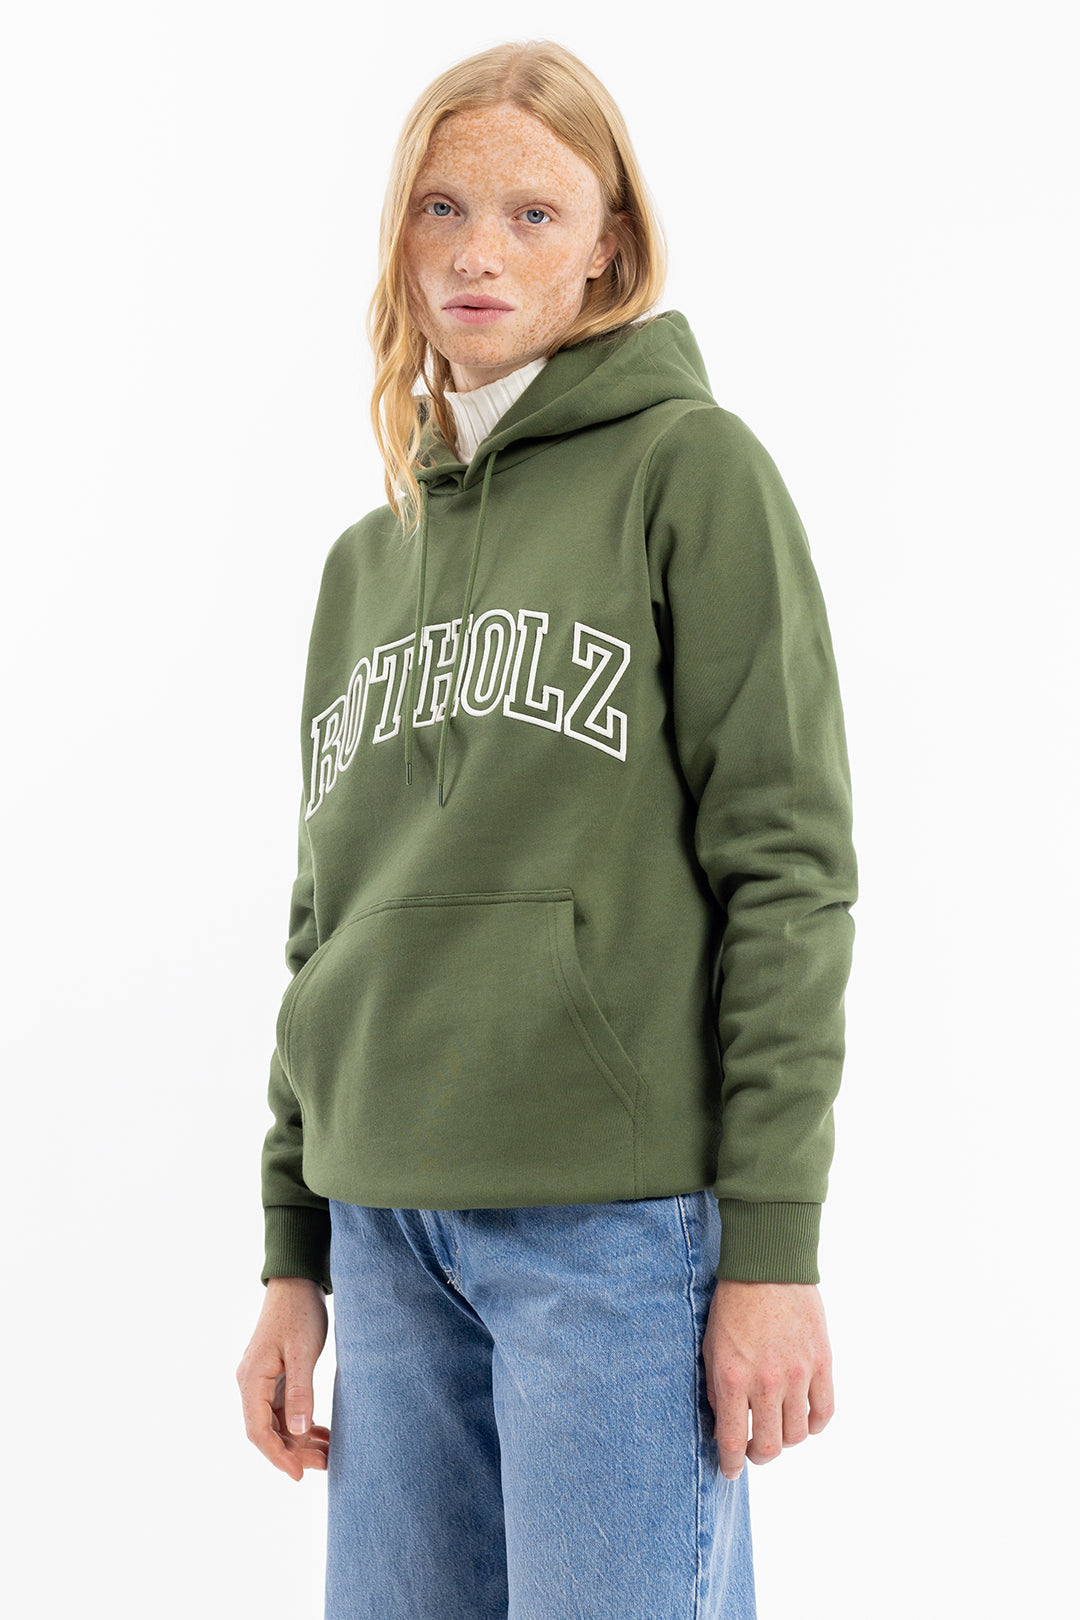 Dark green hoodie logo made of organic cotton from Rotholz